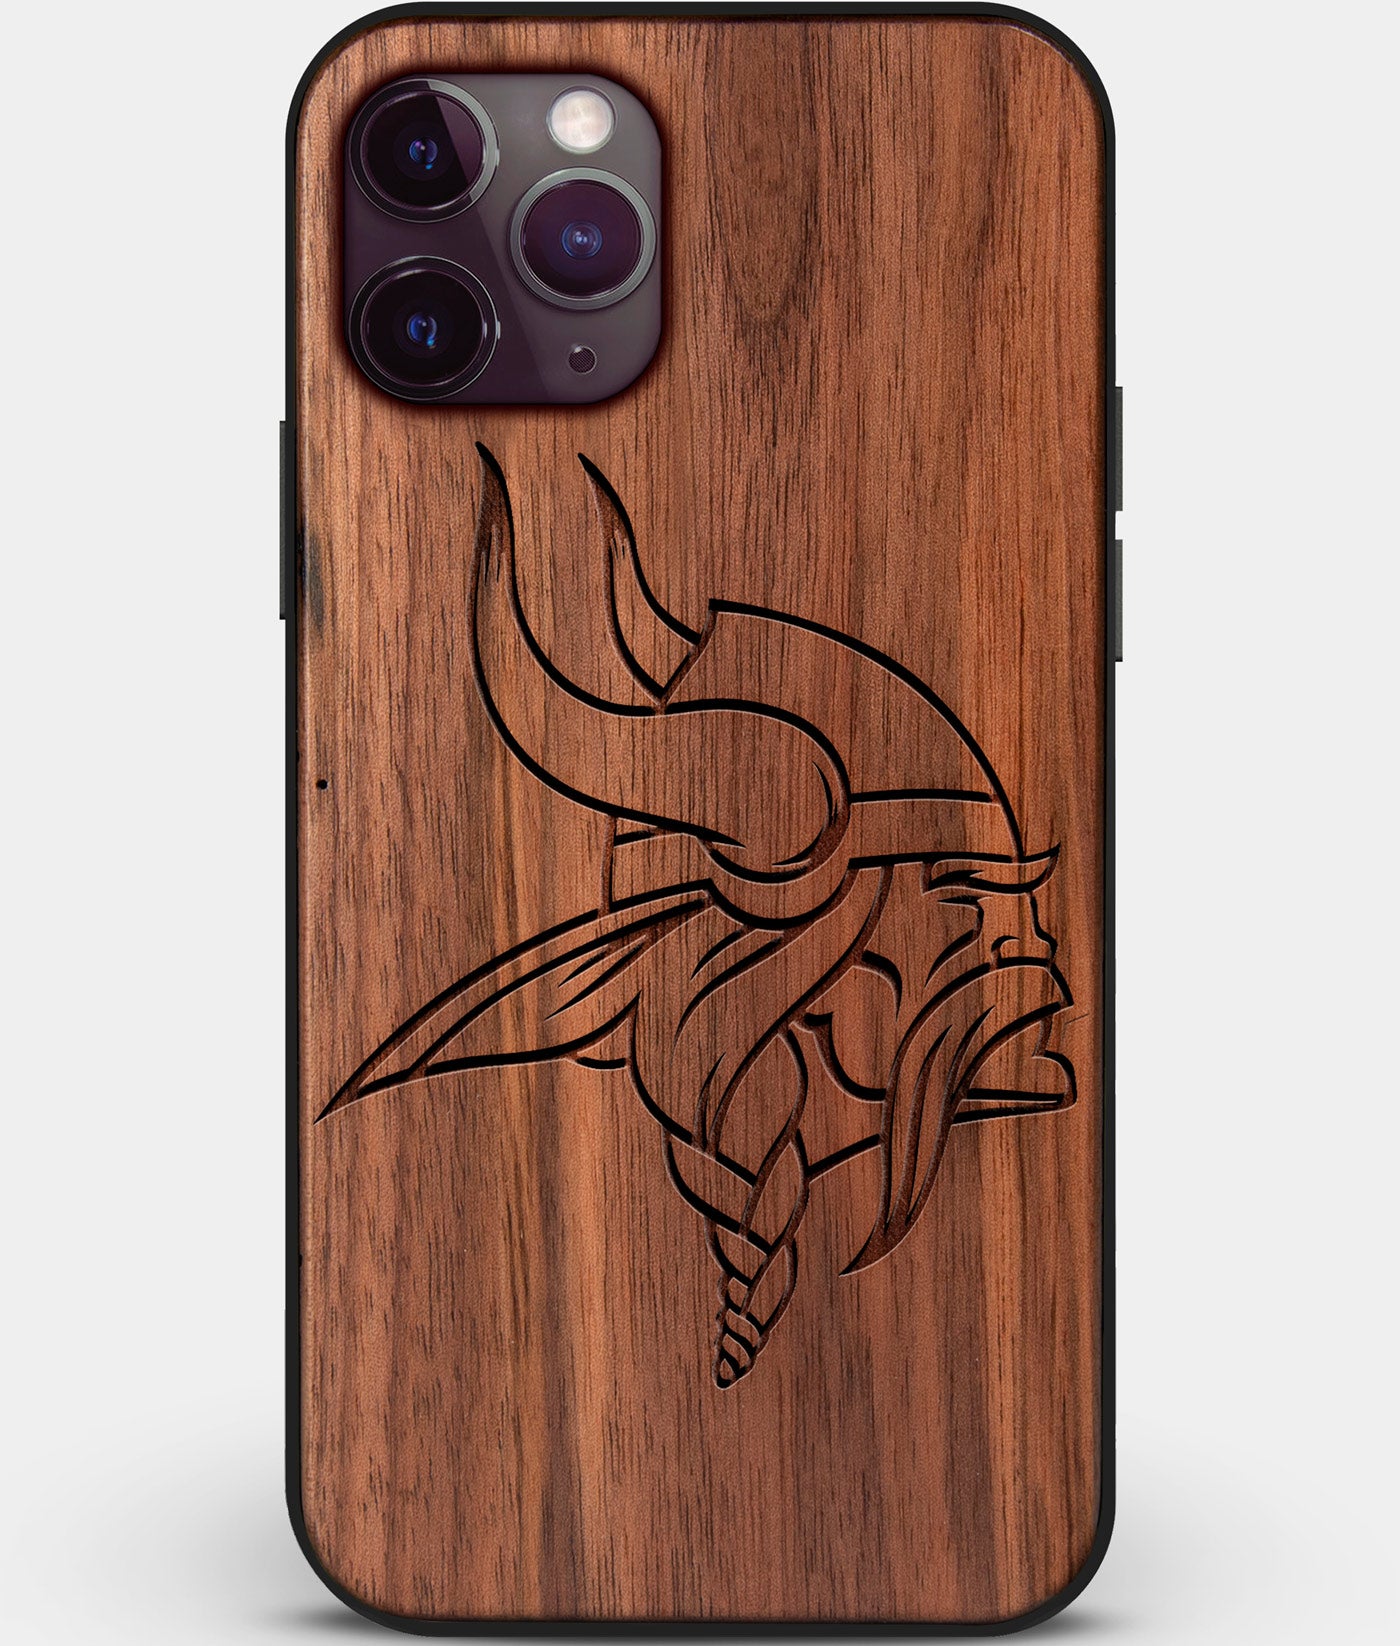 Custom Carved Wood Minnesota Vikings iPhone 11 Pro Case | Personalized Walnut Wood Minnesota Vikings Cover, Birthday Gift, Gifts For Him, Monogrammed Gift For Fan | by Engraved In Nature